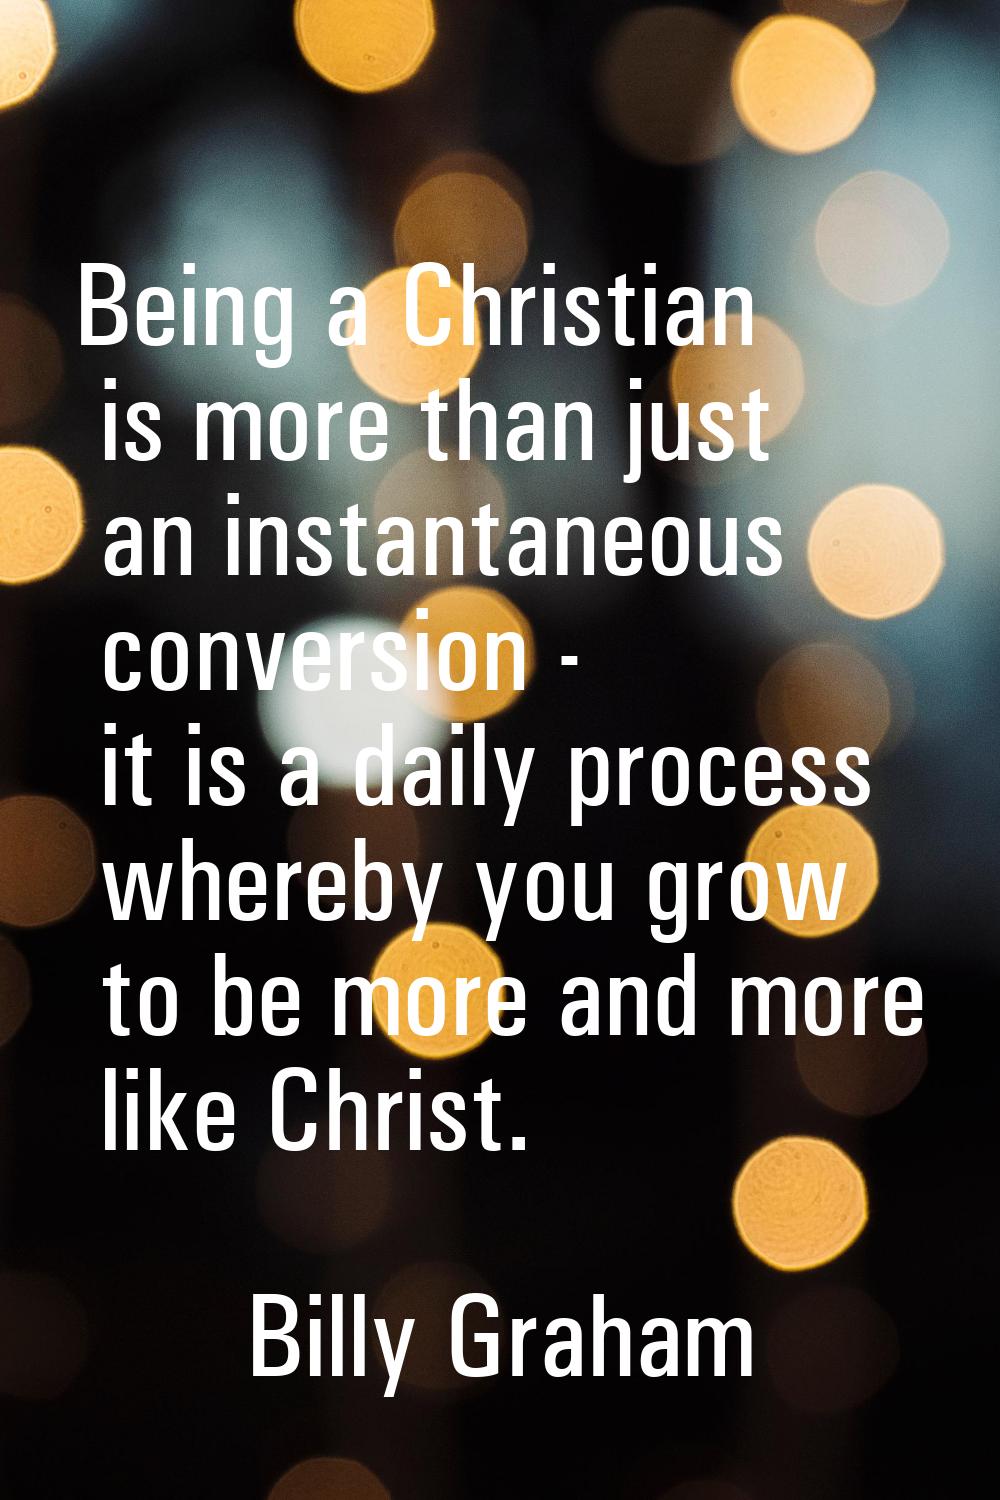 Being a Christian is more than just an instantaneous conversion - it is a daily process whereby you